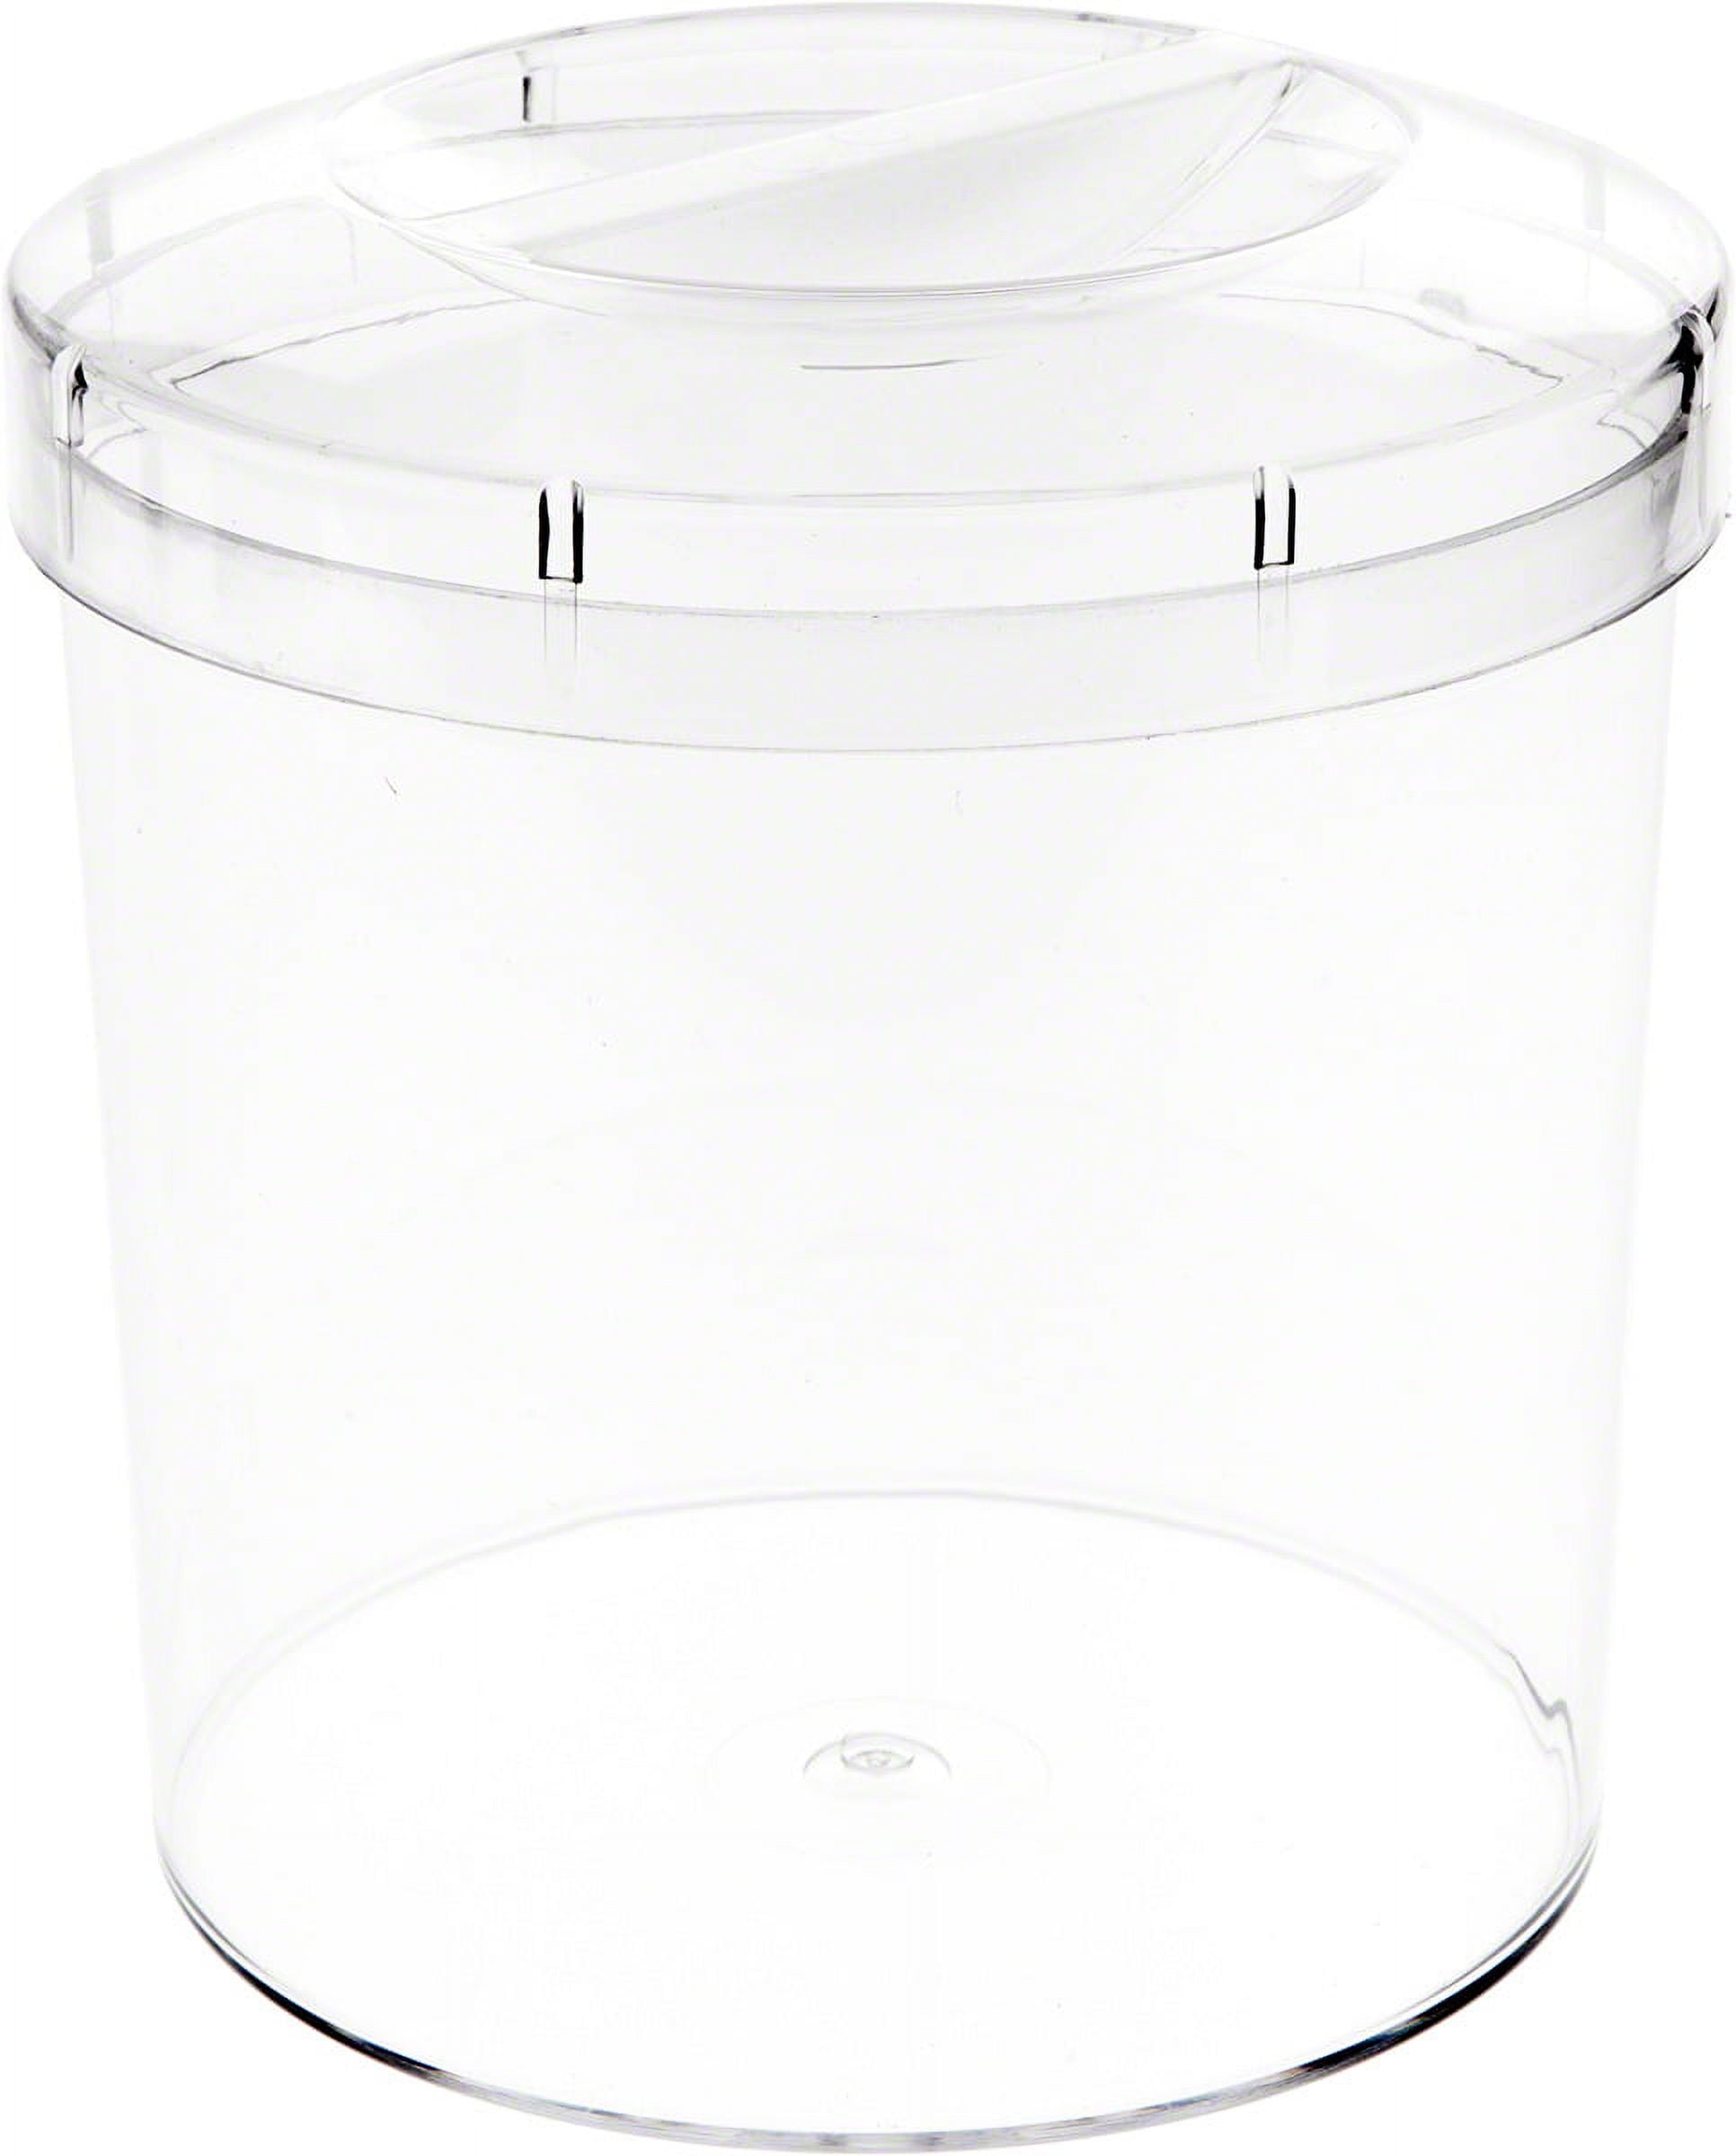 Item No 263 Round Pint 16 oz. Plastic Container, clear, 500 pack